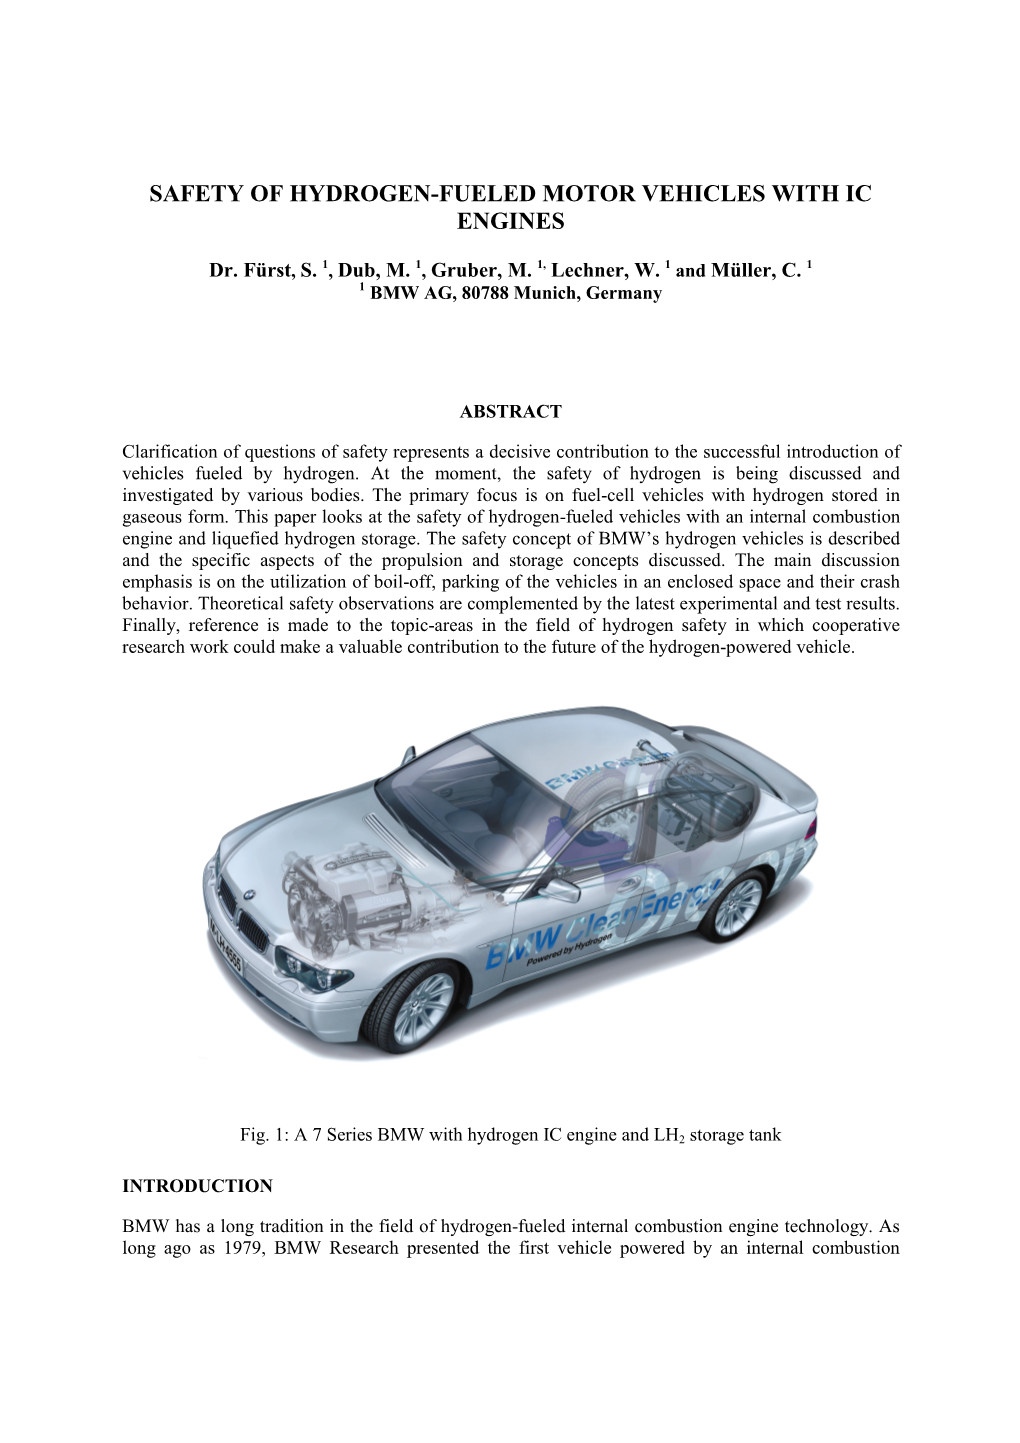 Safety of Hydrogen-Fueled Motor Vehicles with Ic Engines